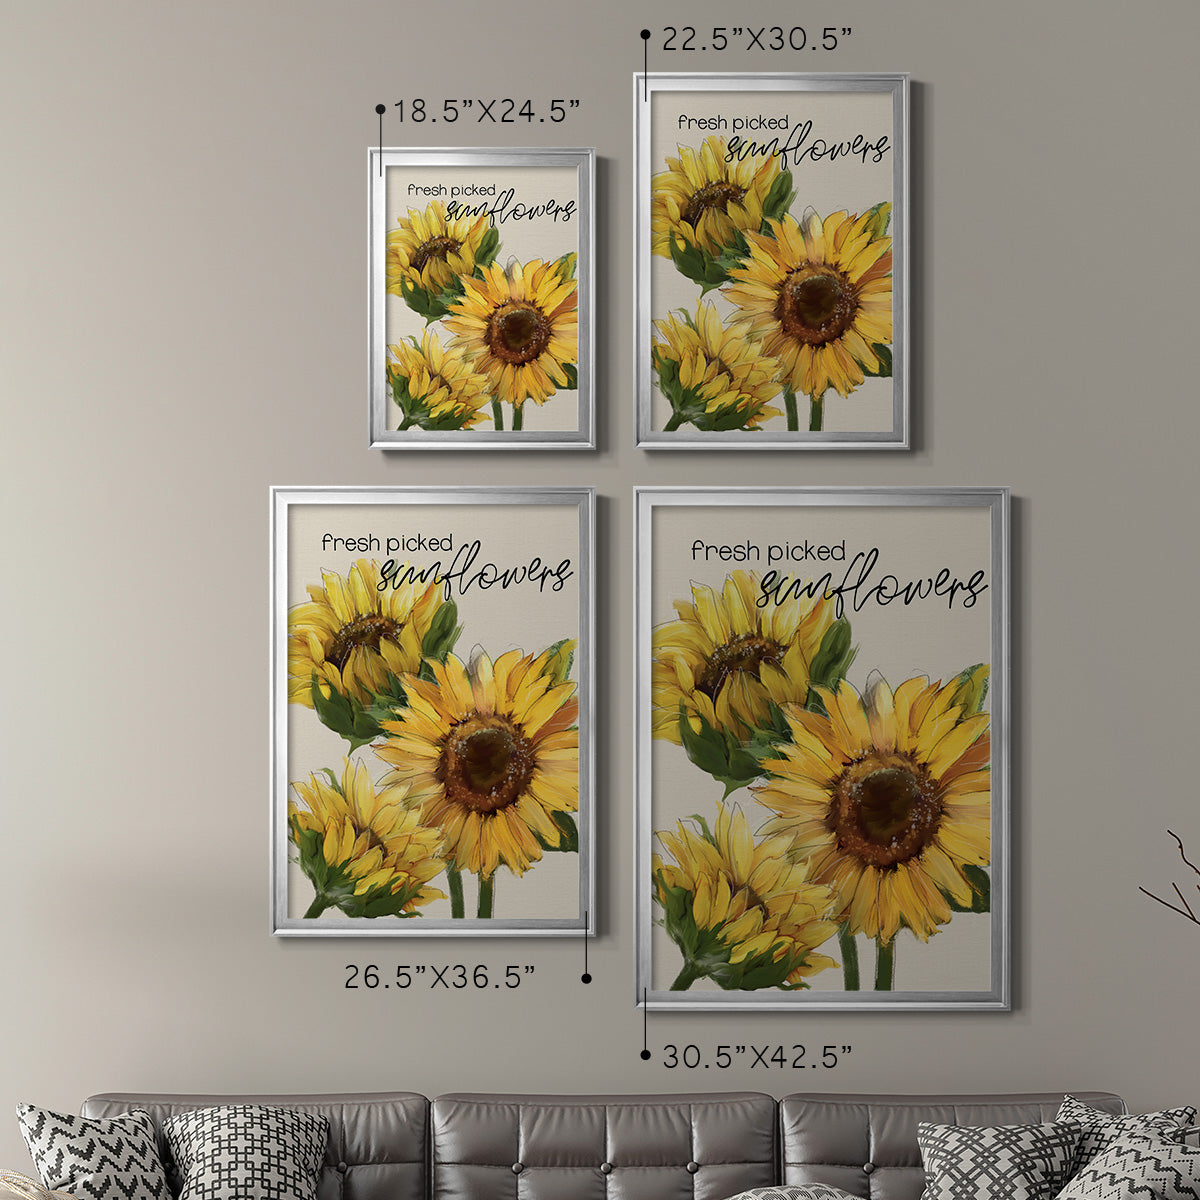 Fresh Picked Sunflowers Premium Framed Print - Ready to Hang